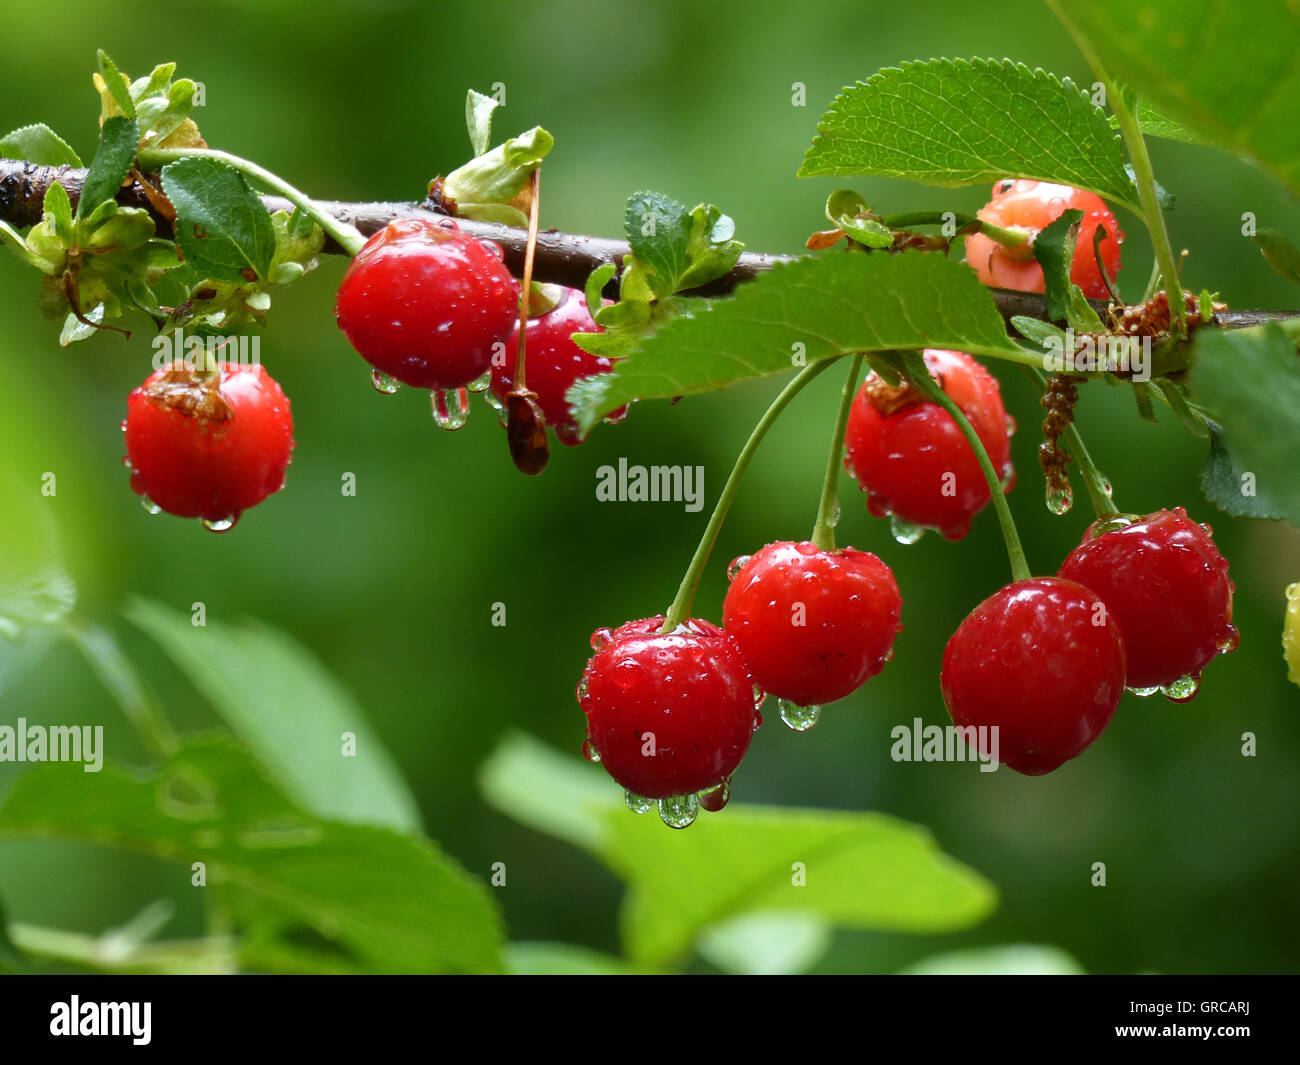 Red Morello Cherries With Drops Of Water, On Cherry Tree Stock Photo